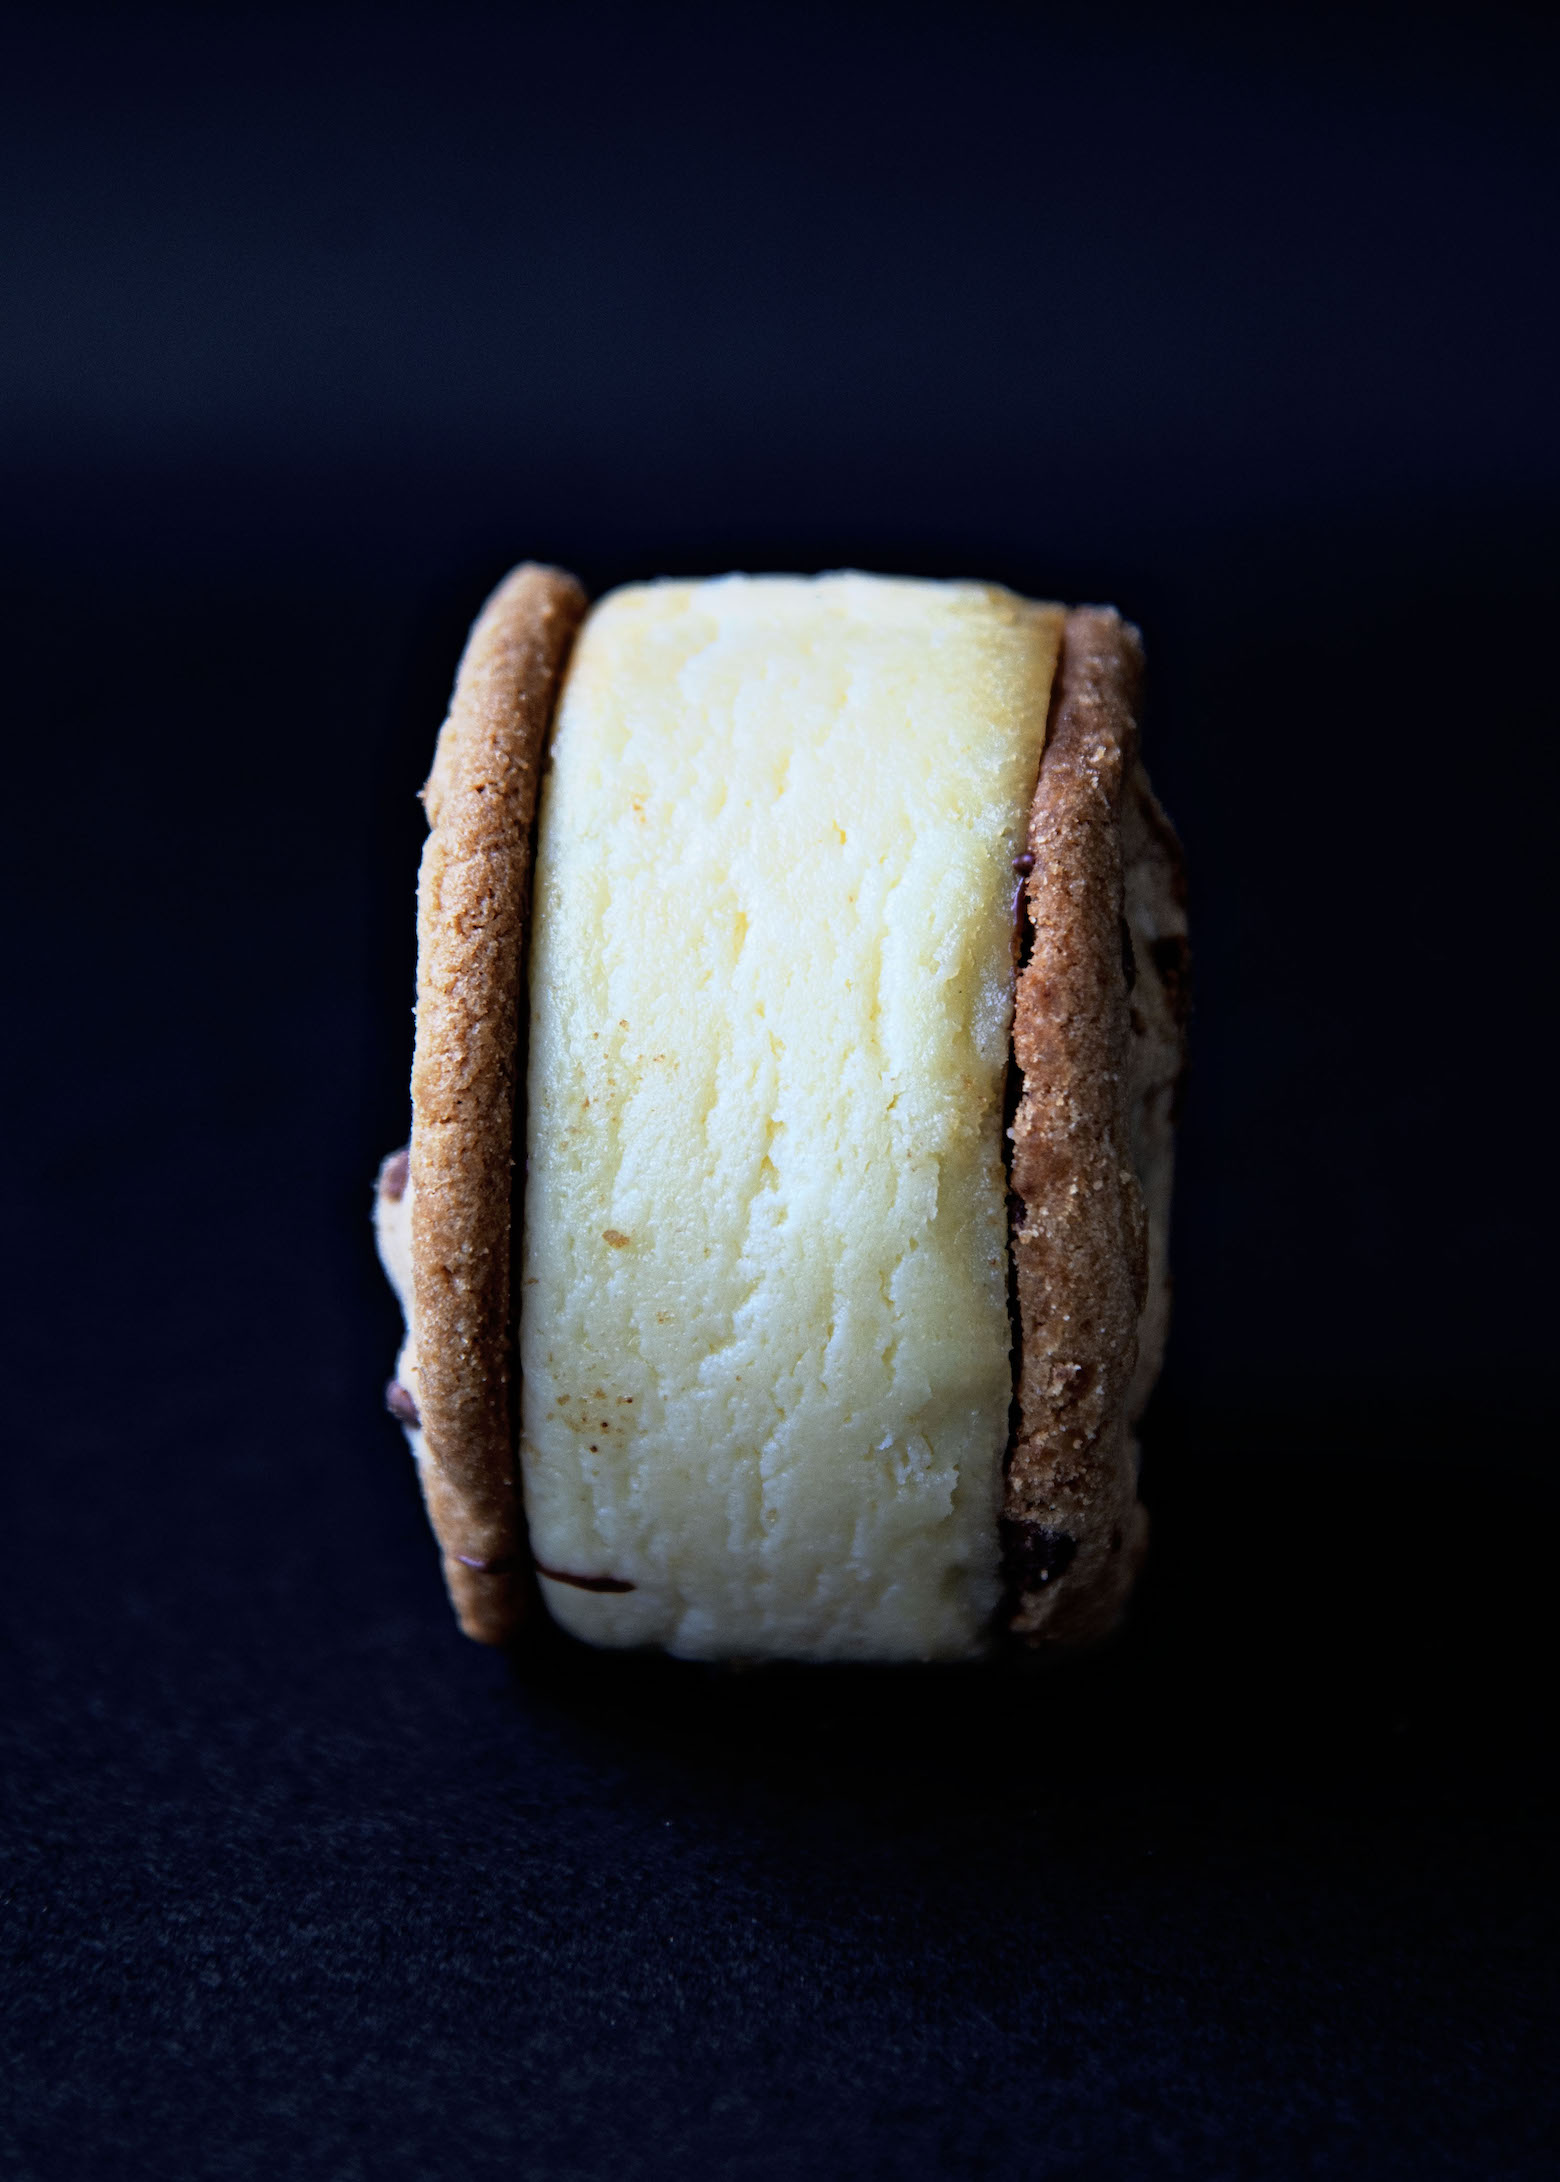 Single Chocolate Chip Cookie Cheesecake Sandwich turned on it's side. Black background. 